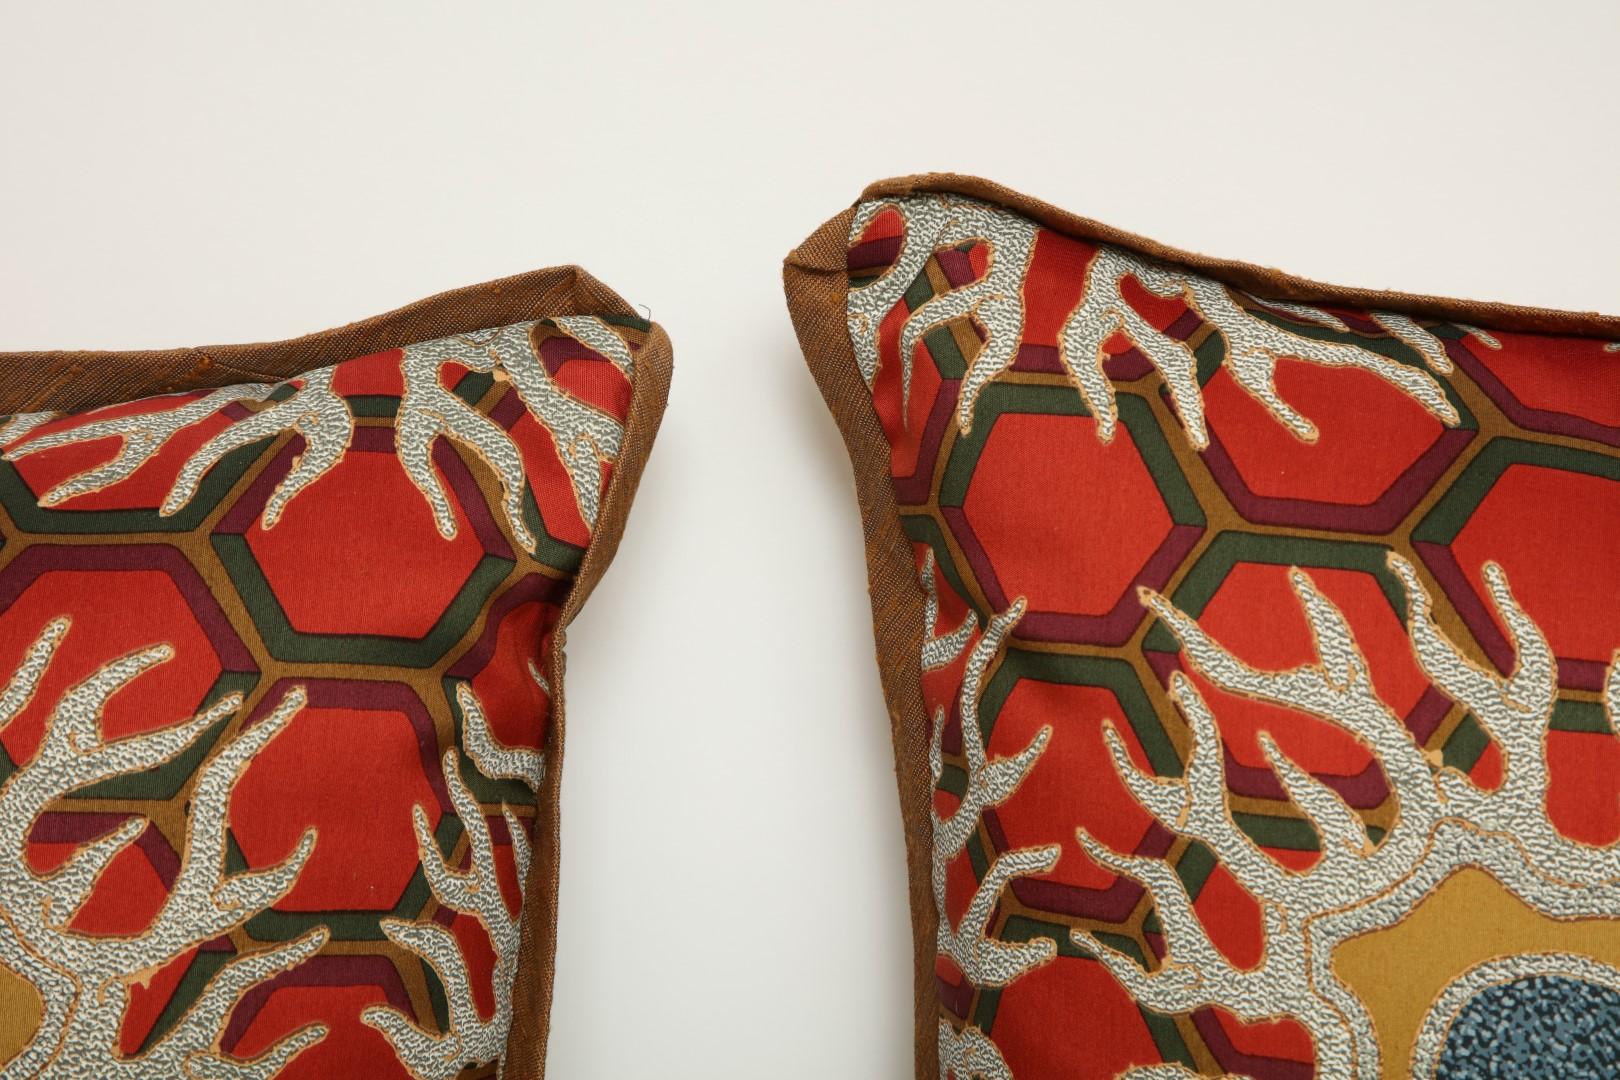 A pair of Tony Duqette cushions, Asian inspired pattern
50 down/50 feather insert
Taffeta backing material
Newly made using vintage Duqette fabric, circa 1960.